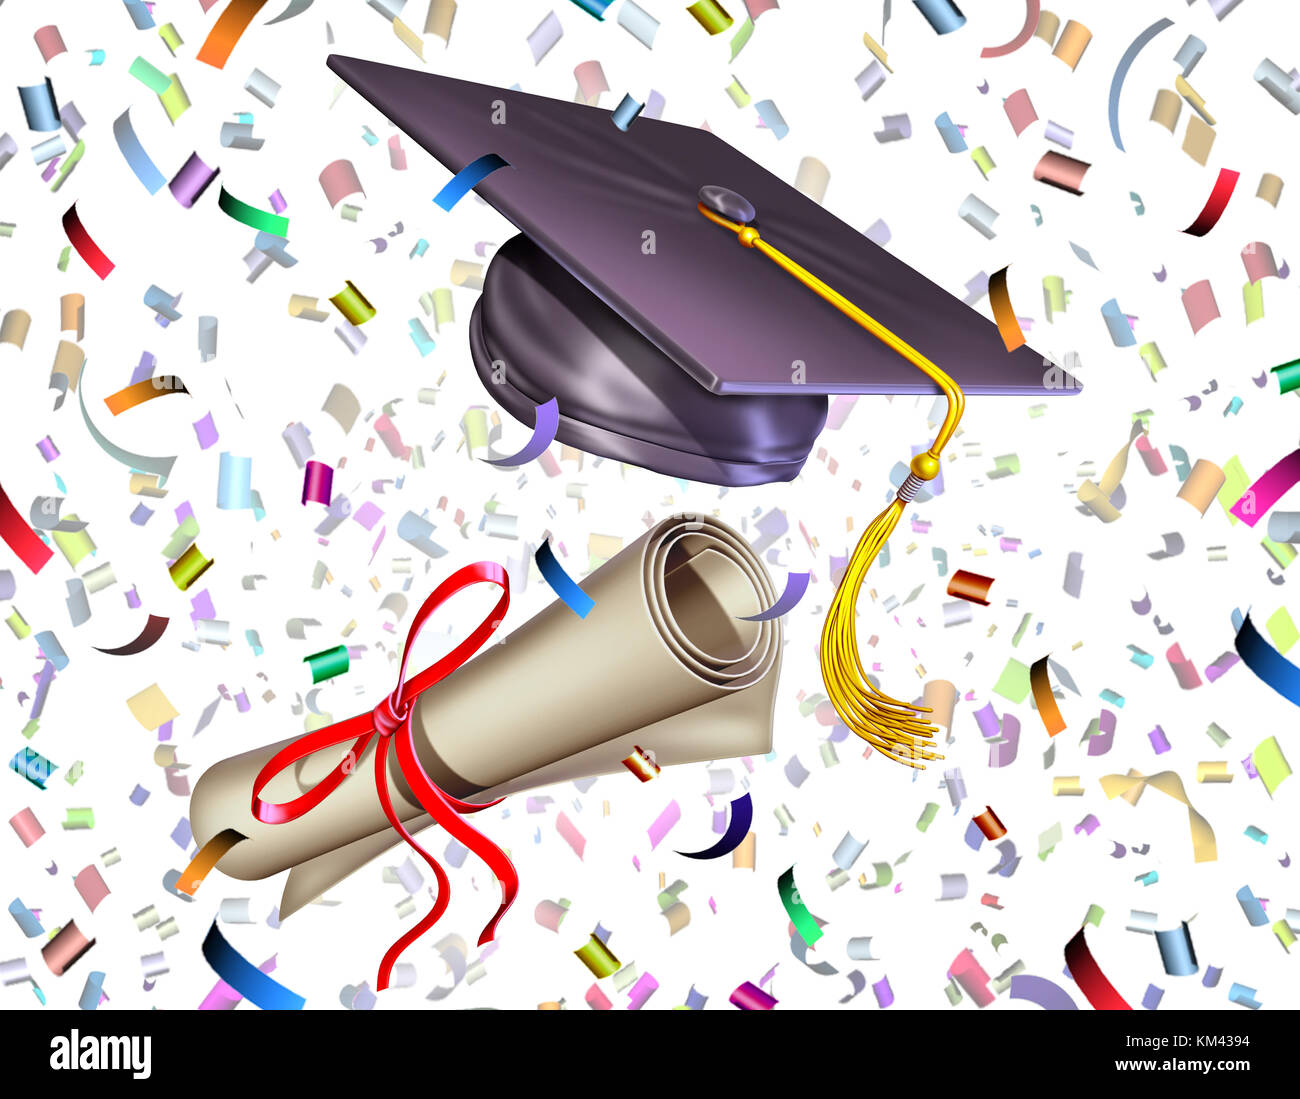 Graduation education celebration ceremony as a mortar board or graduate cap and diploma being tossed up in the air with party confetti. Stock Photo